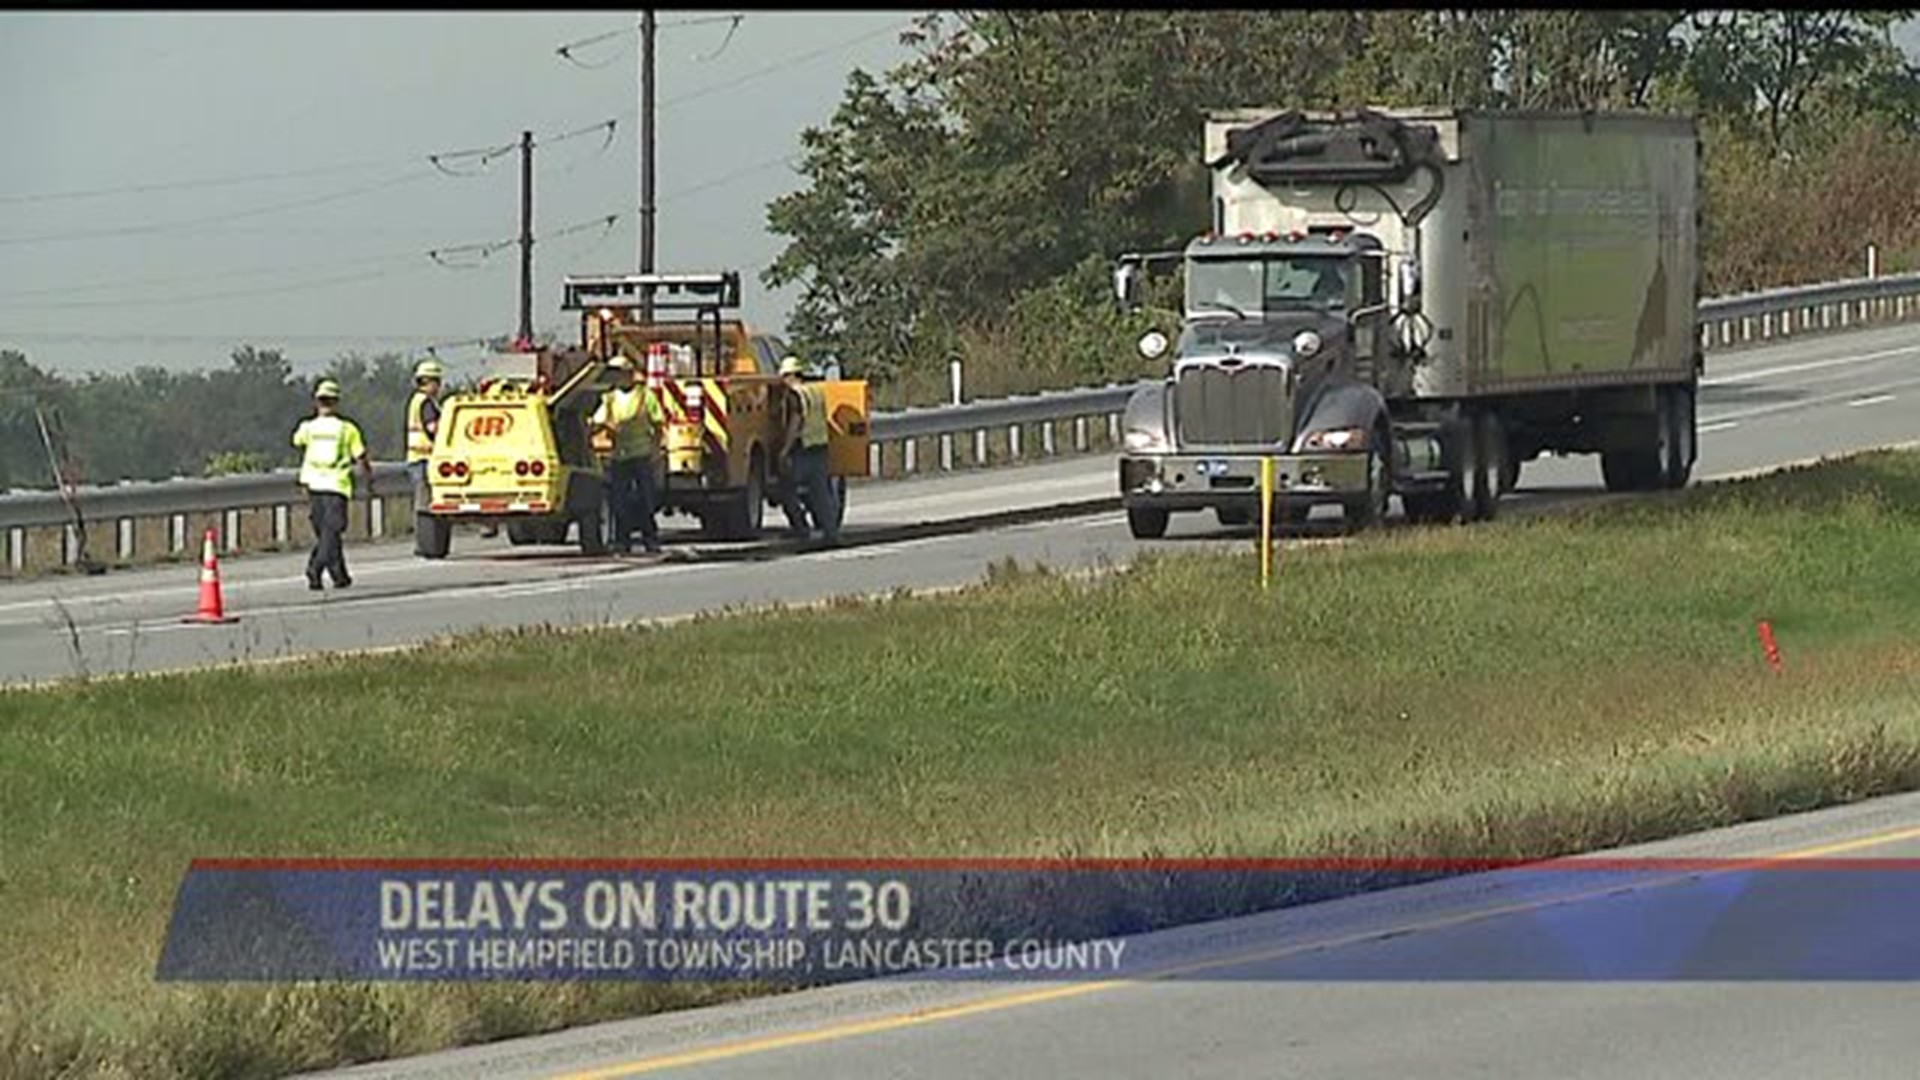 Traffic delays along RT 30 in Lancaster County for repairs